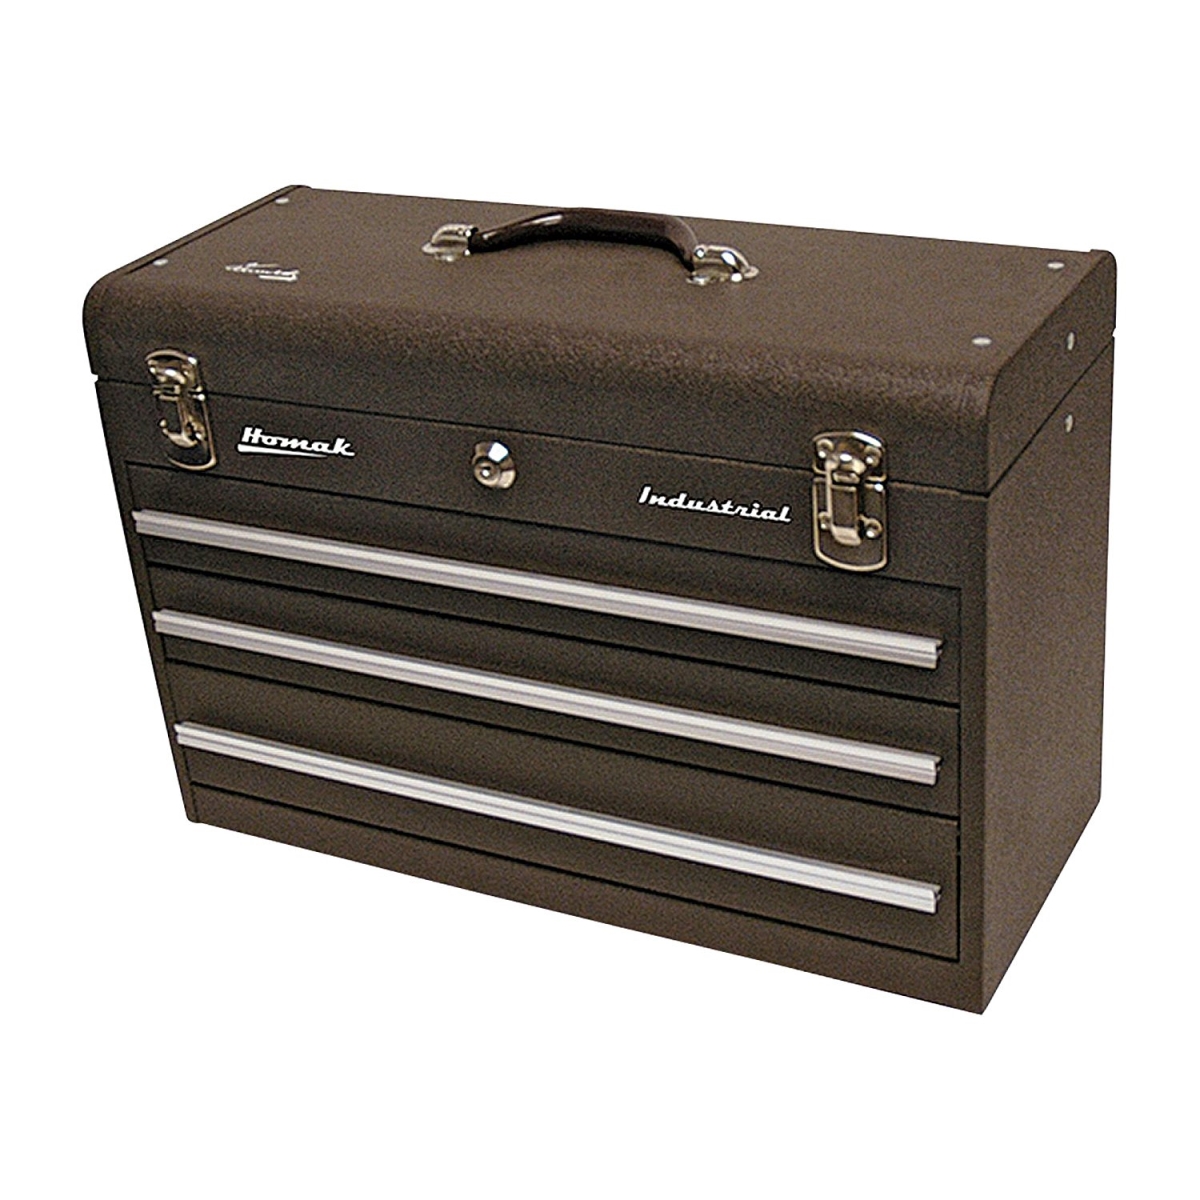 TotalTurf 13.75 x 20.25 x 8.75 in. Industrial 3 Drawer Friction Toolbox - Brown